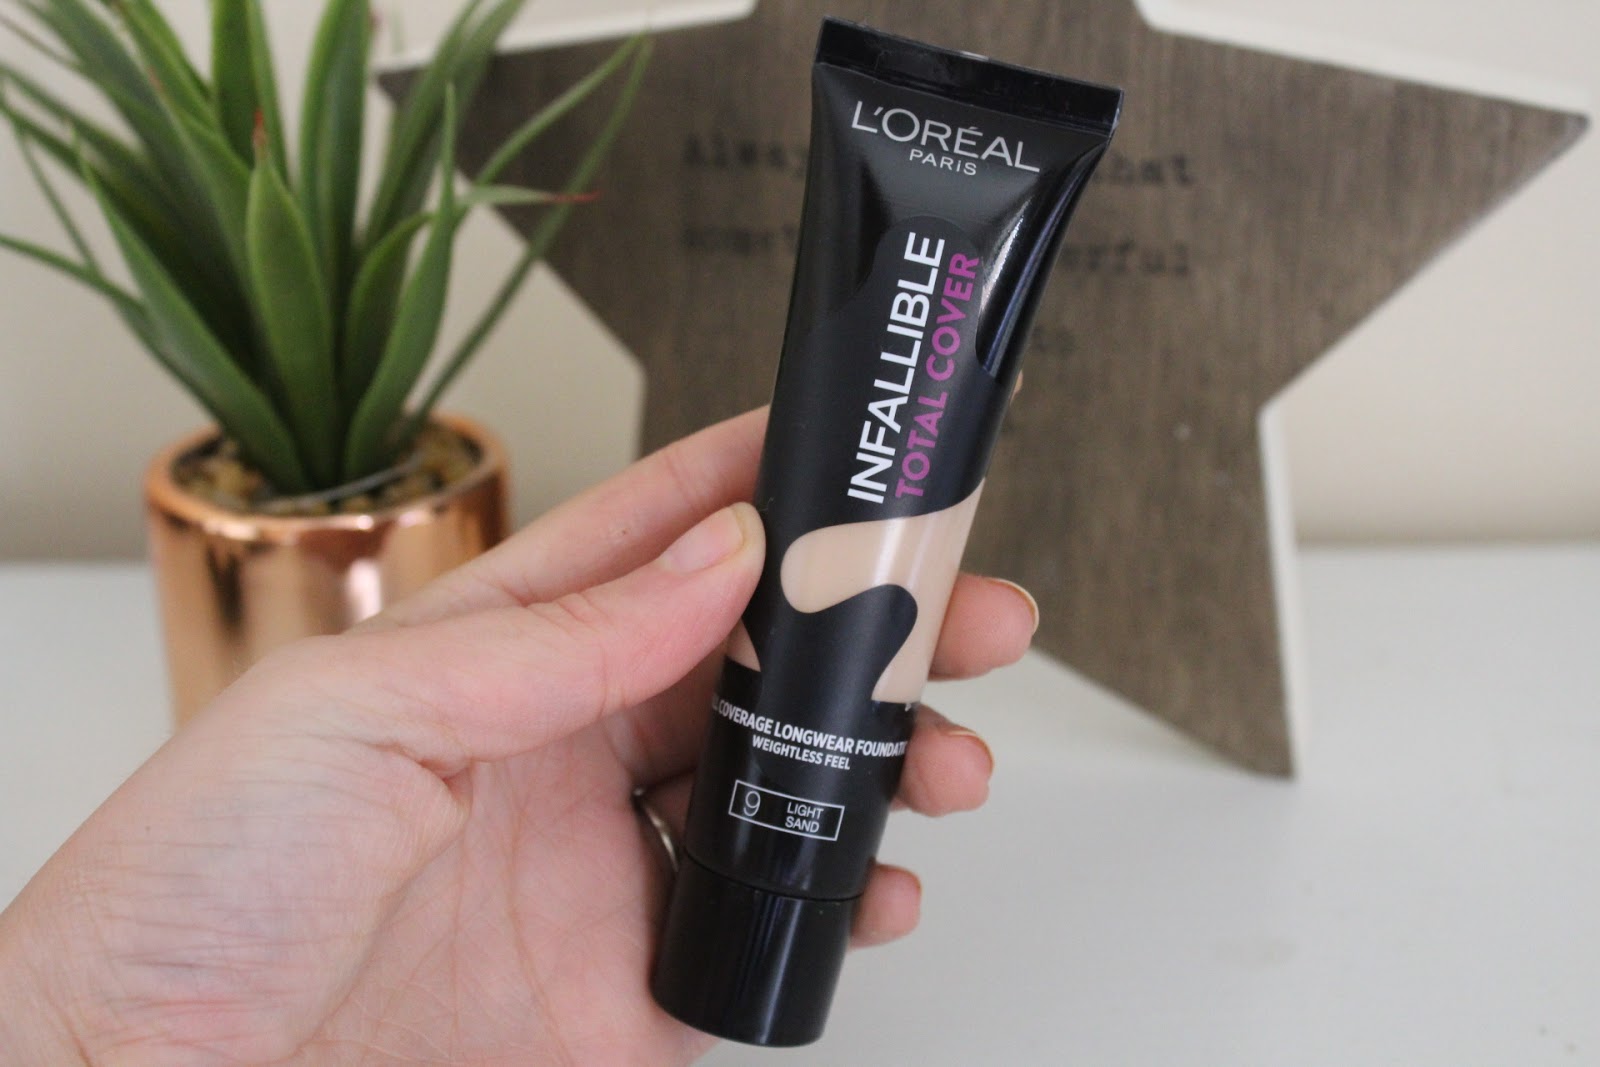 L'Oreal Infallible Total Cover 